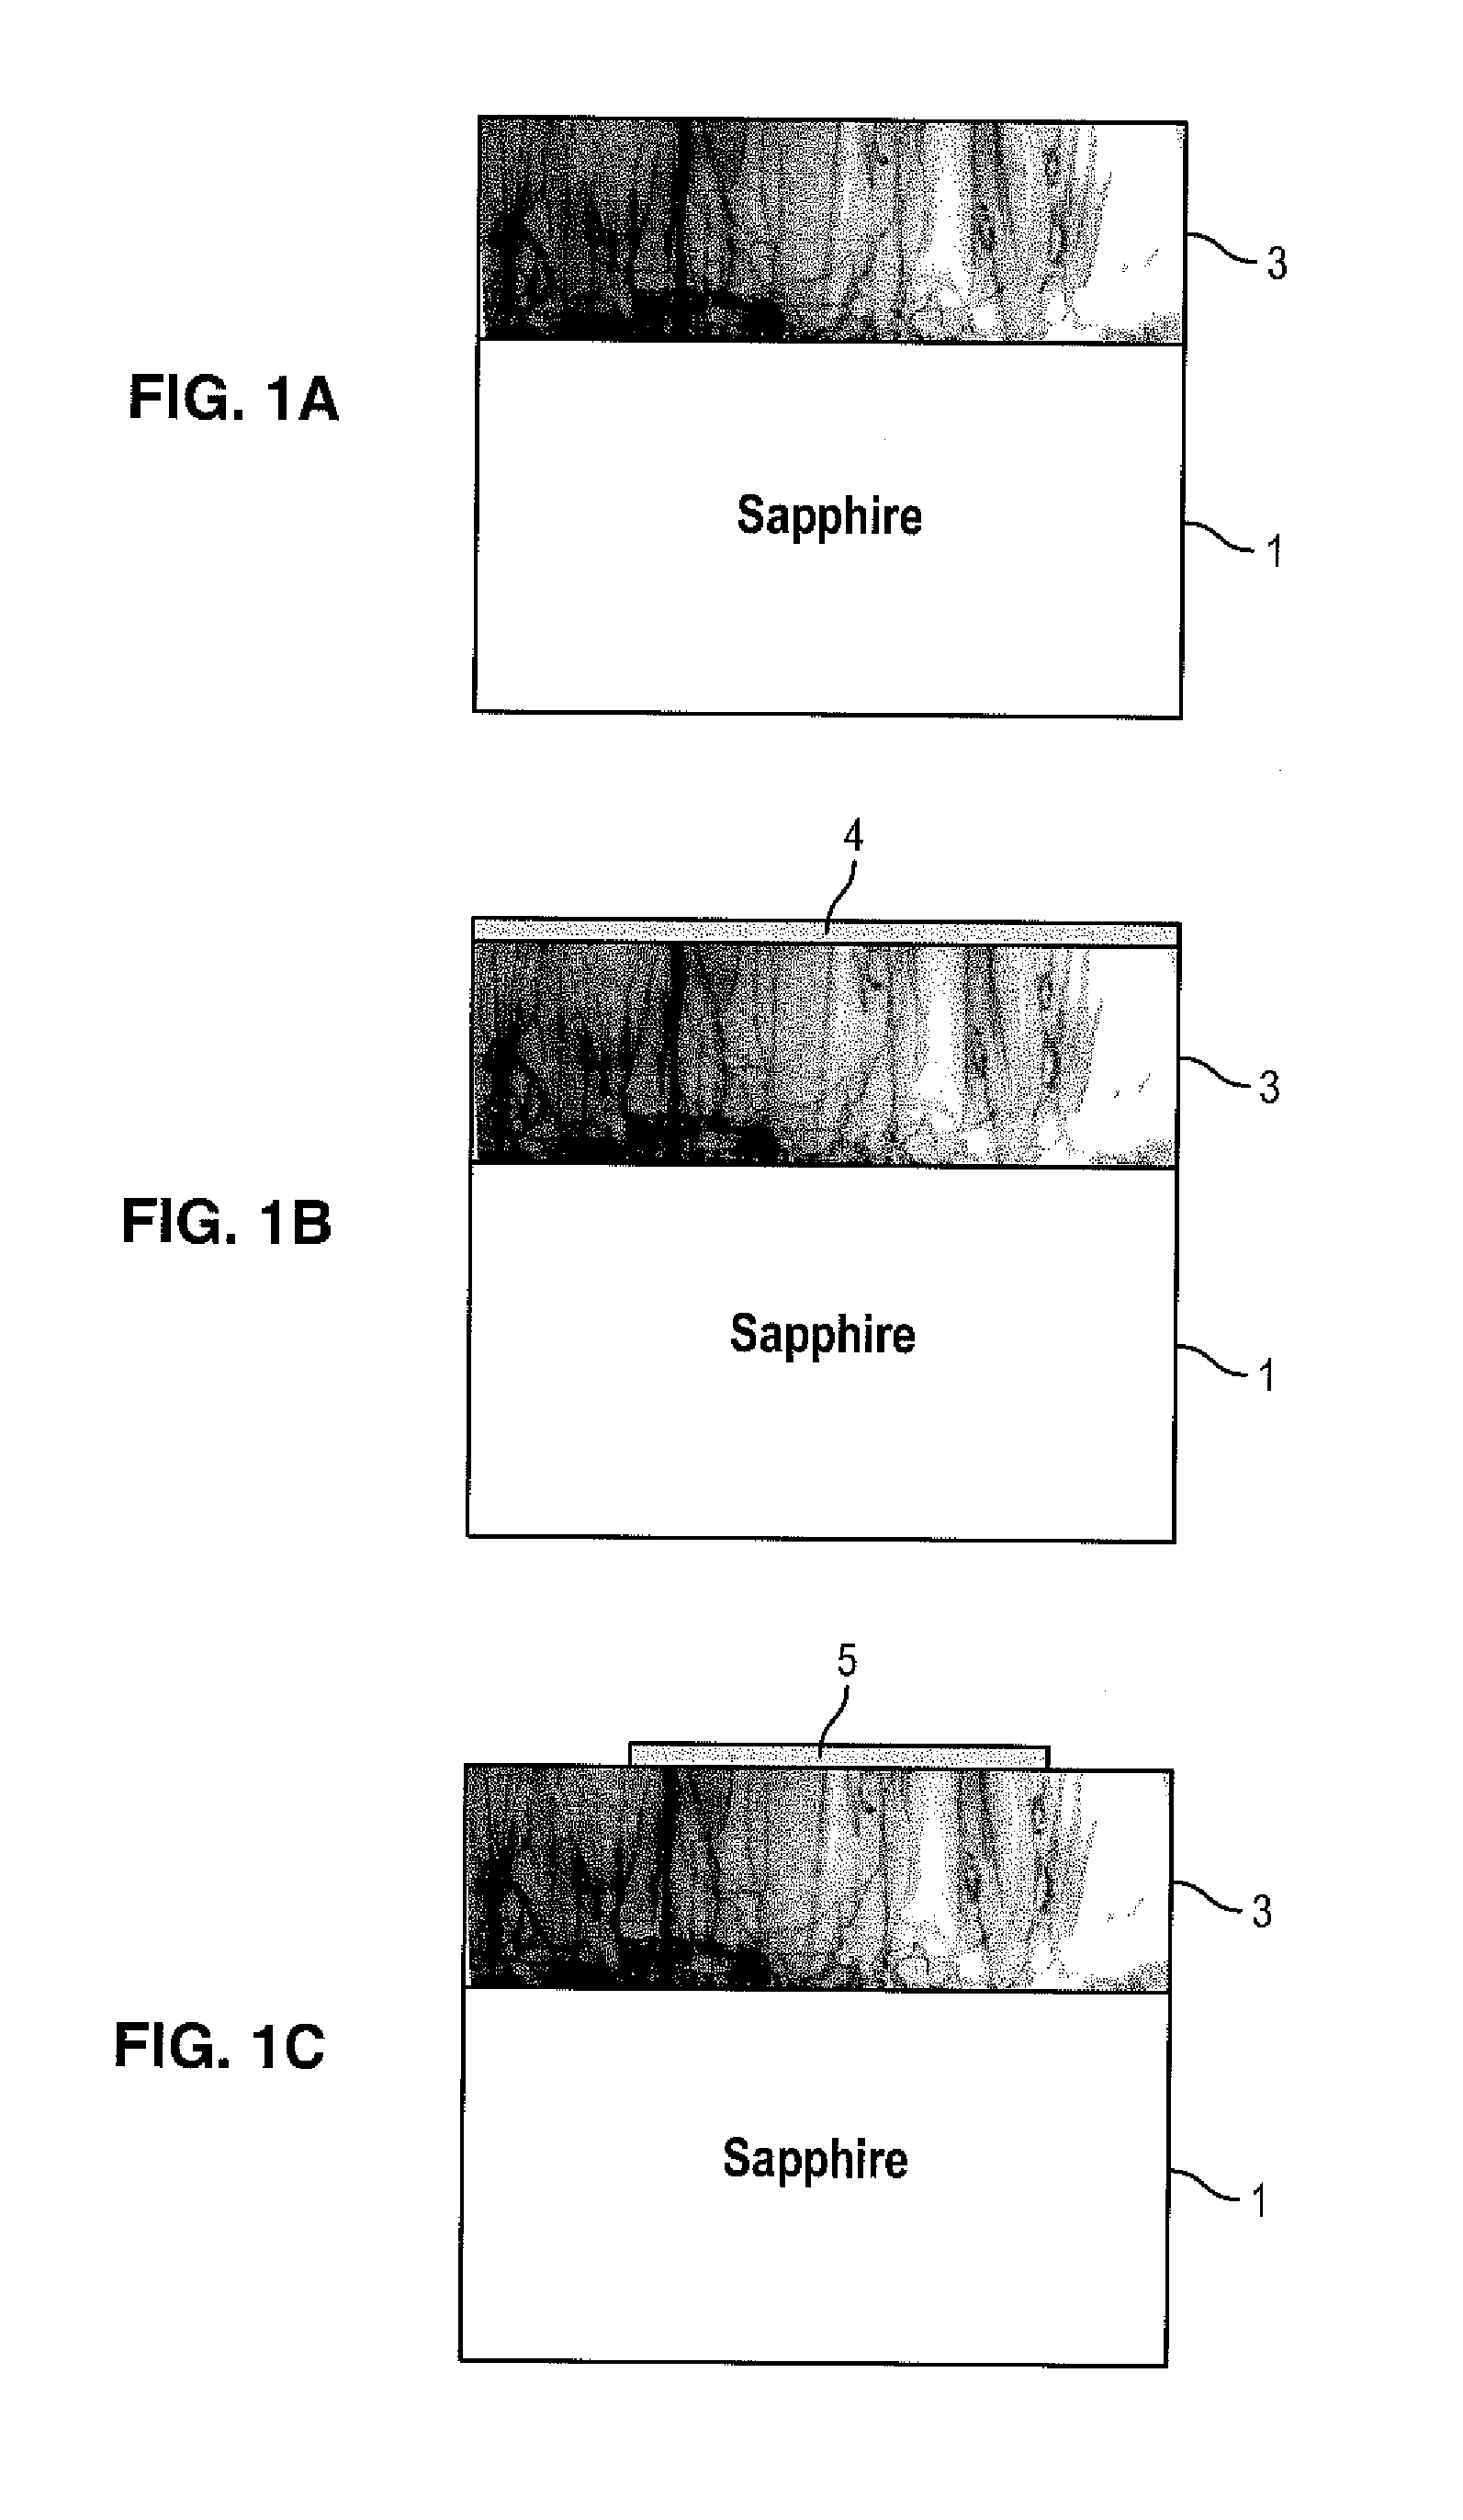 Manufacturing of low defect density free-standing gallium nitride substrates and devices fabricated thereof